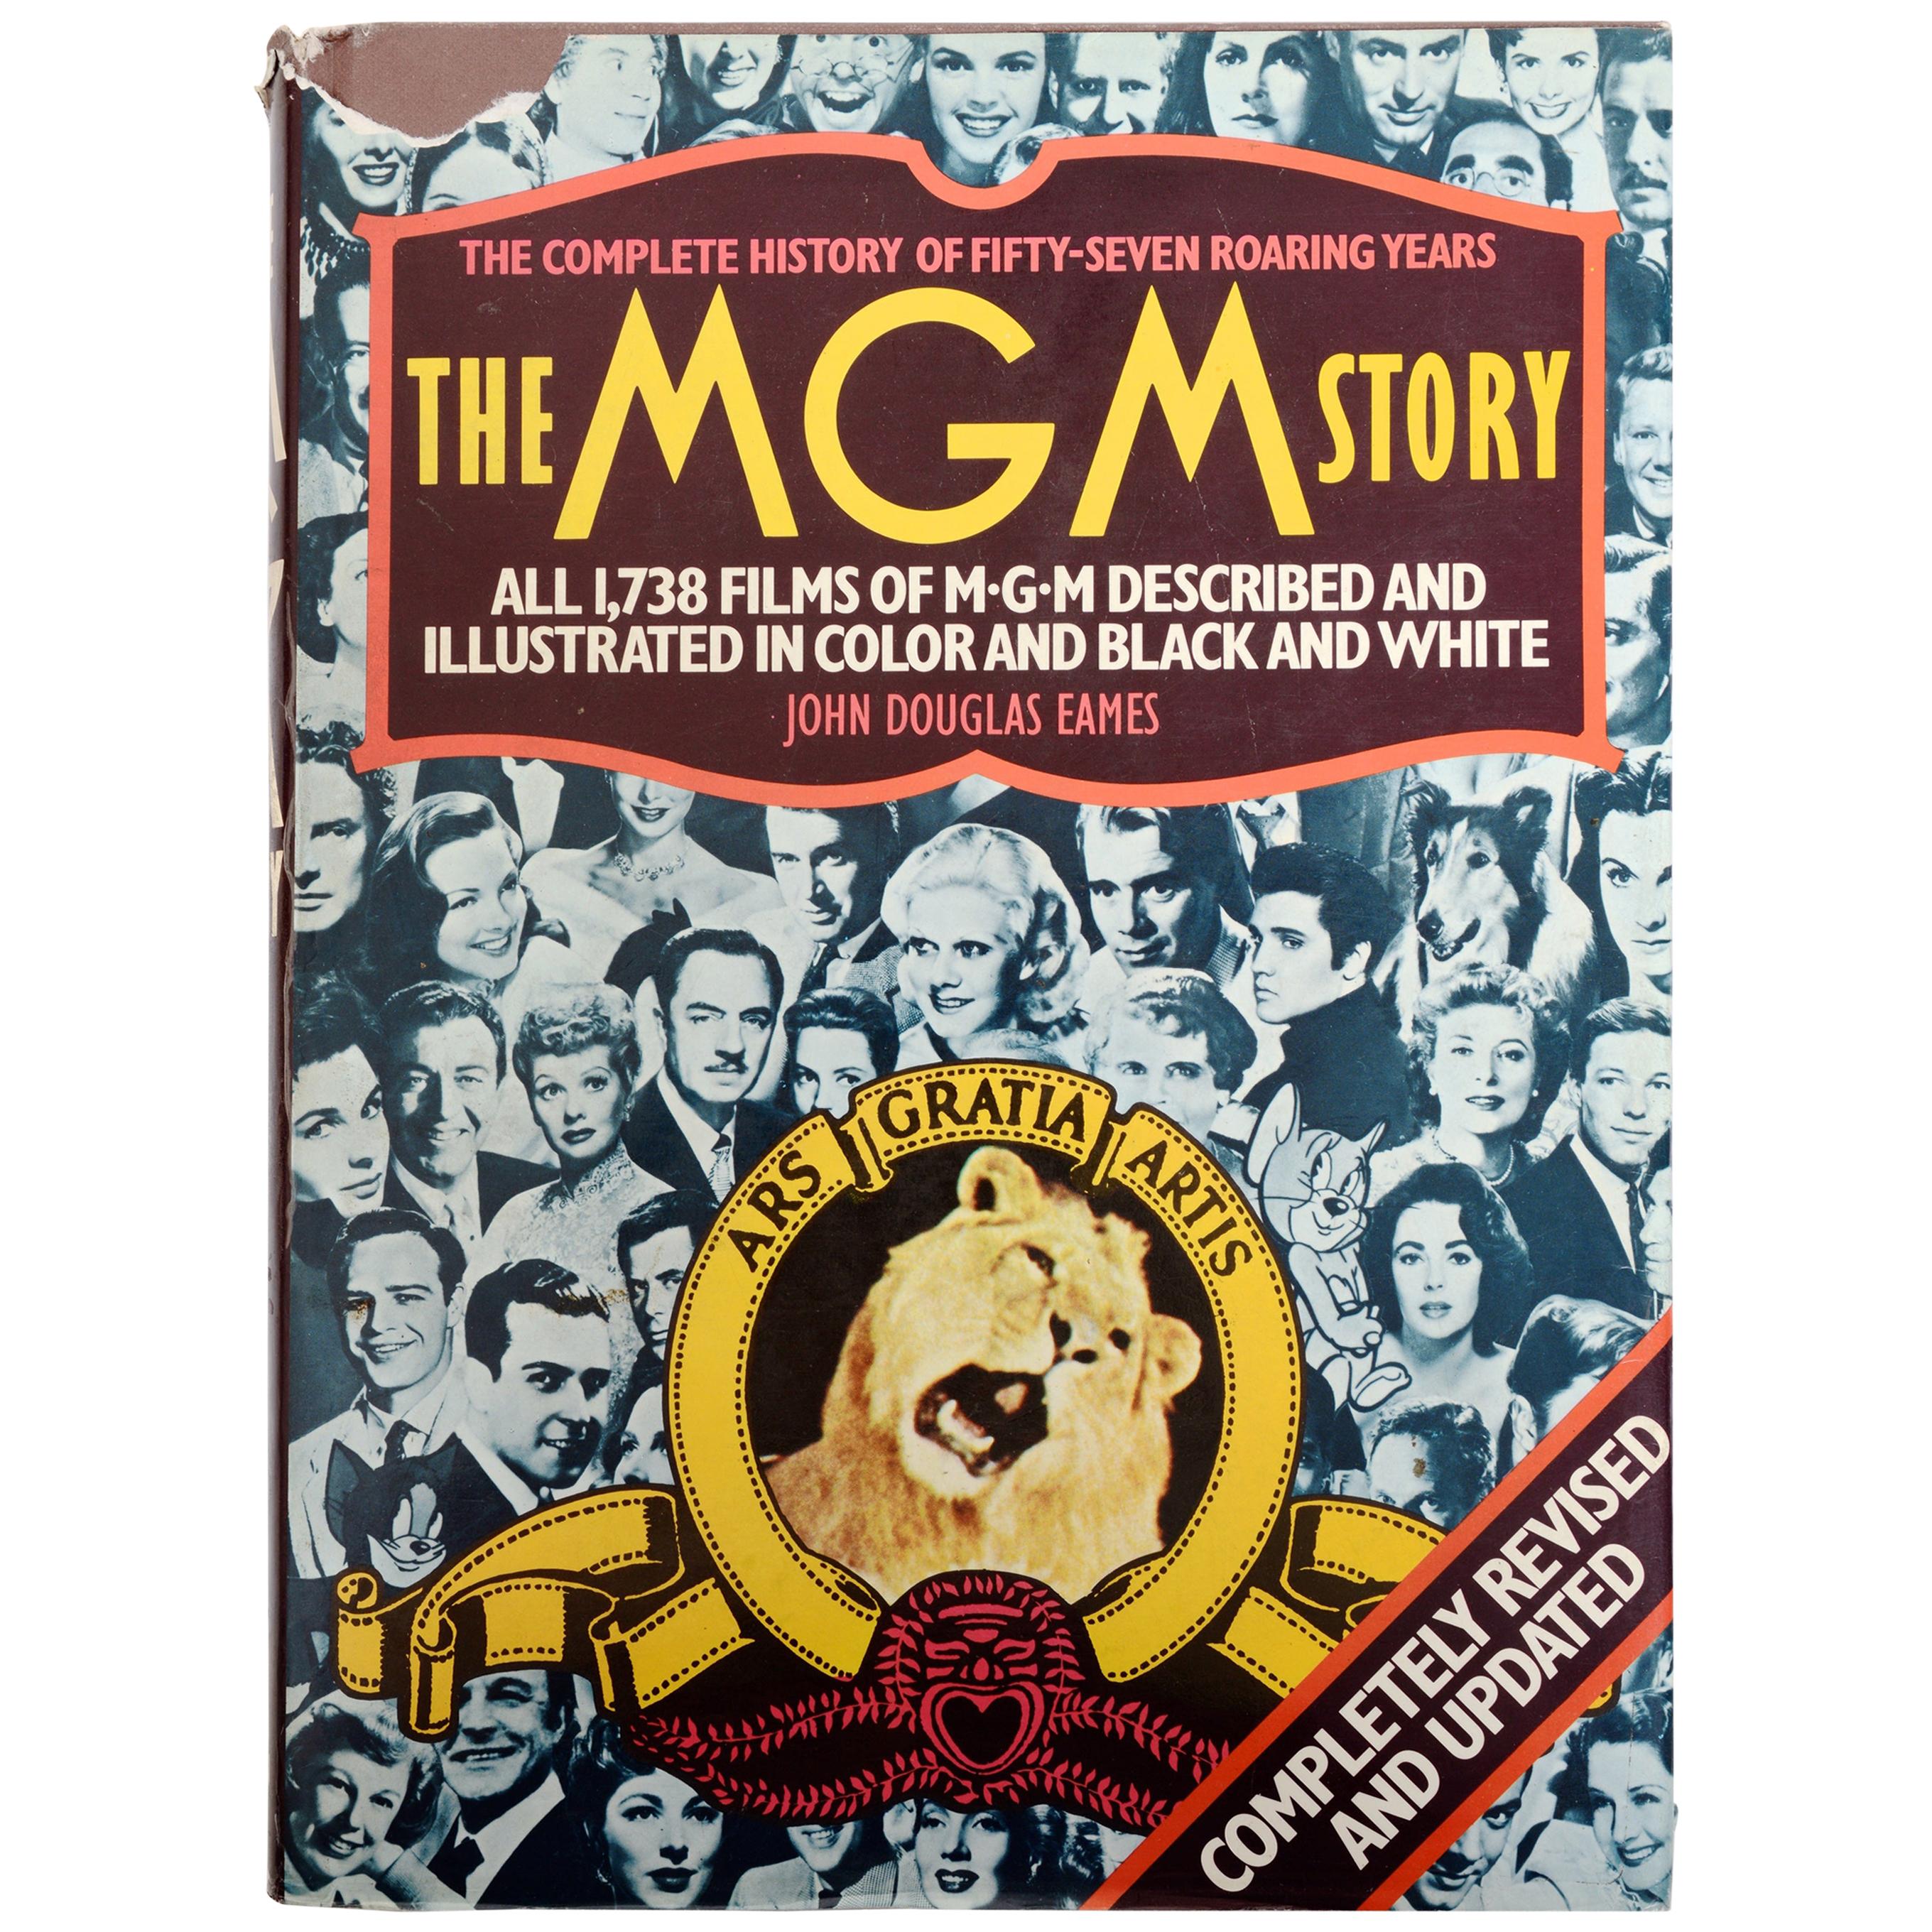 The MGM Story The Complete History of Fifty Roaring Years, by John Eames For Sale